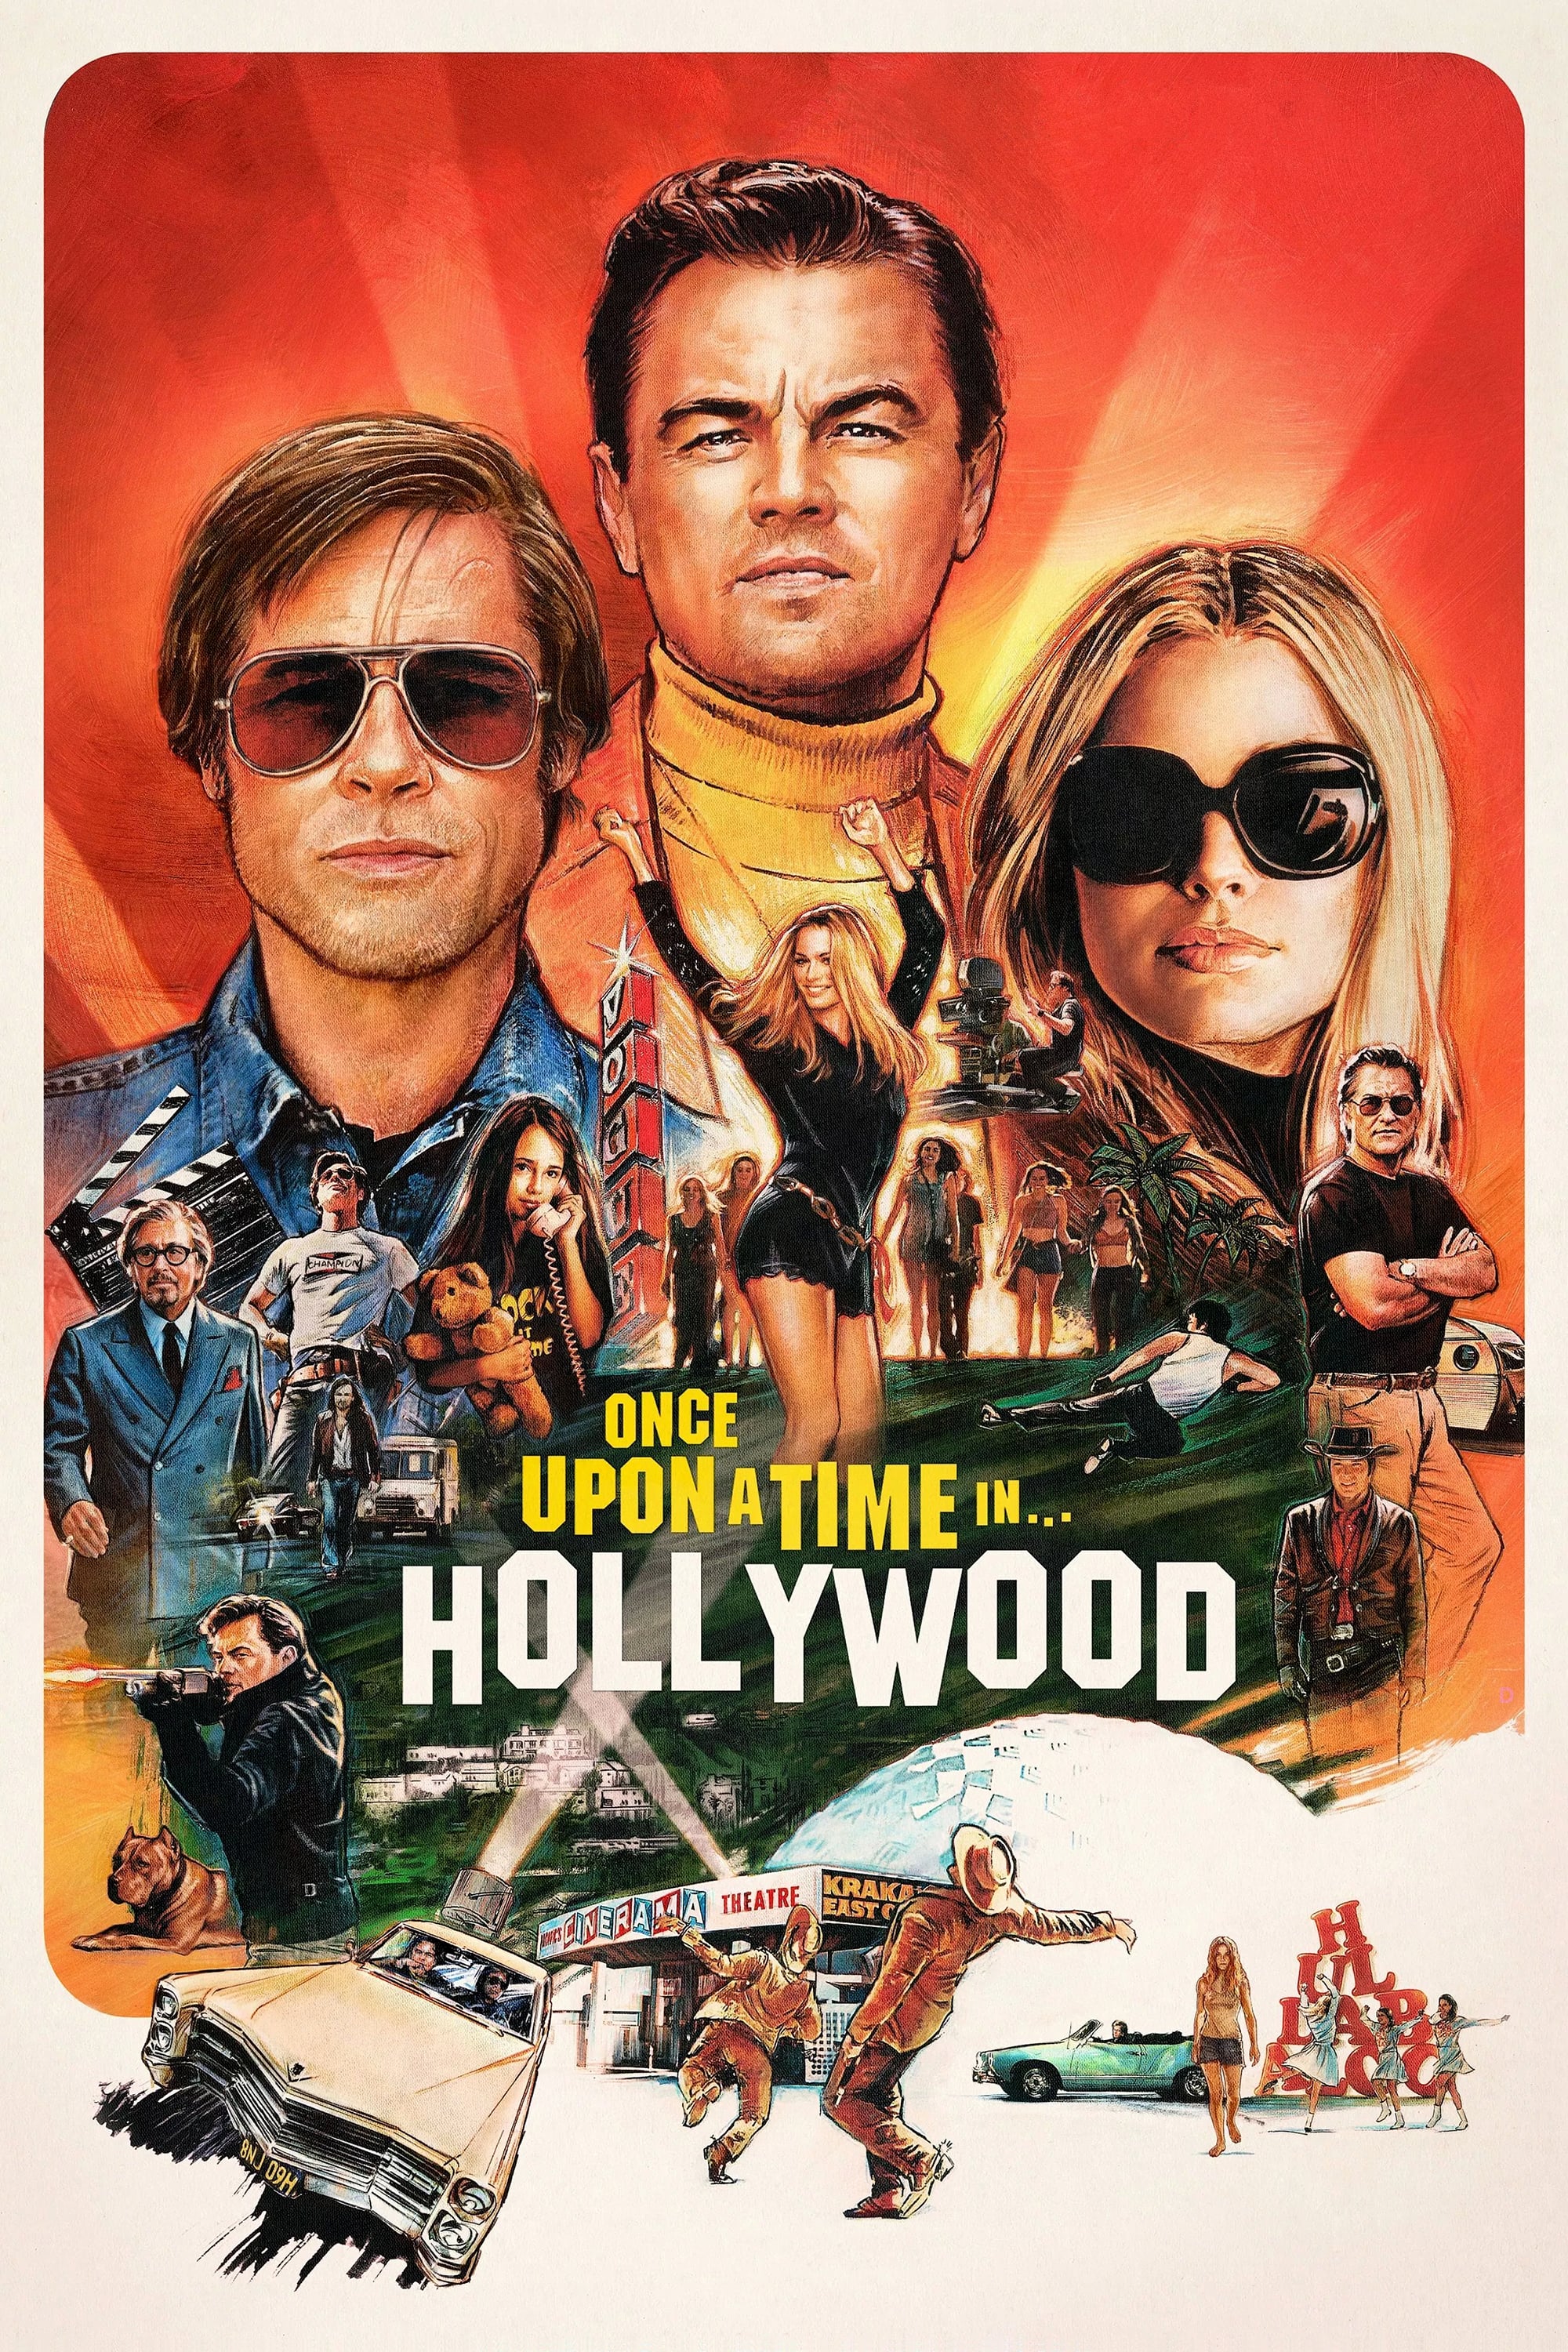 Poster for the movie "Once Upon a Time... in Hollywood"